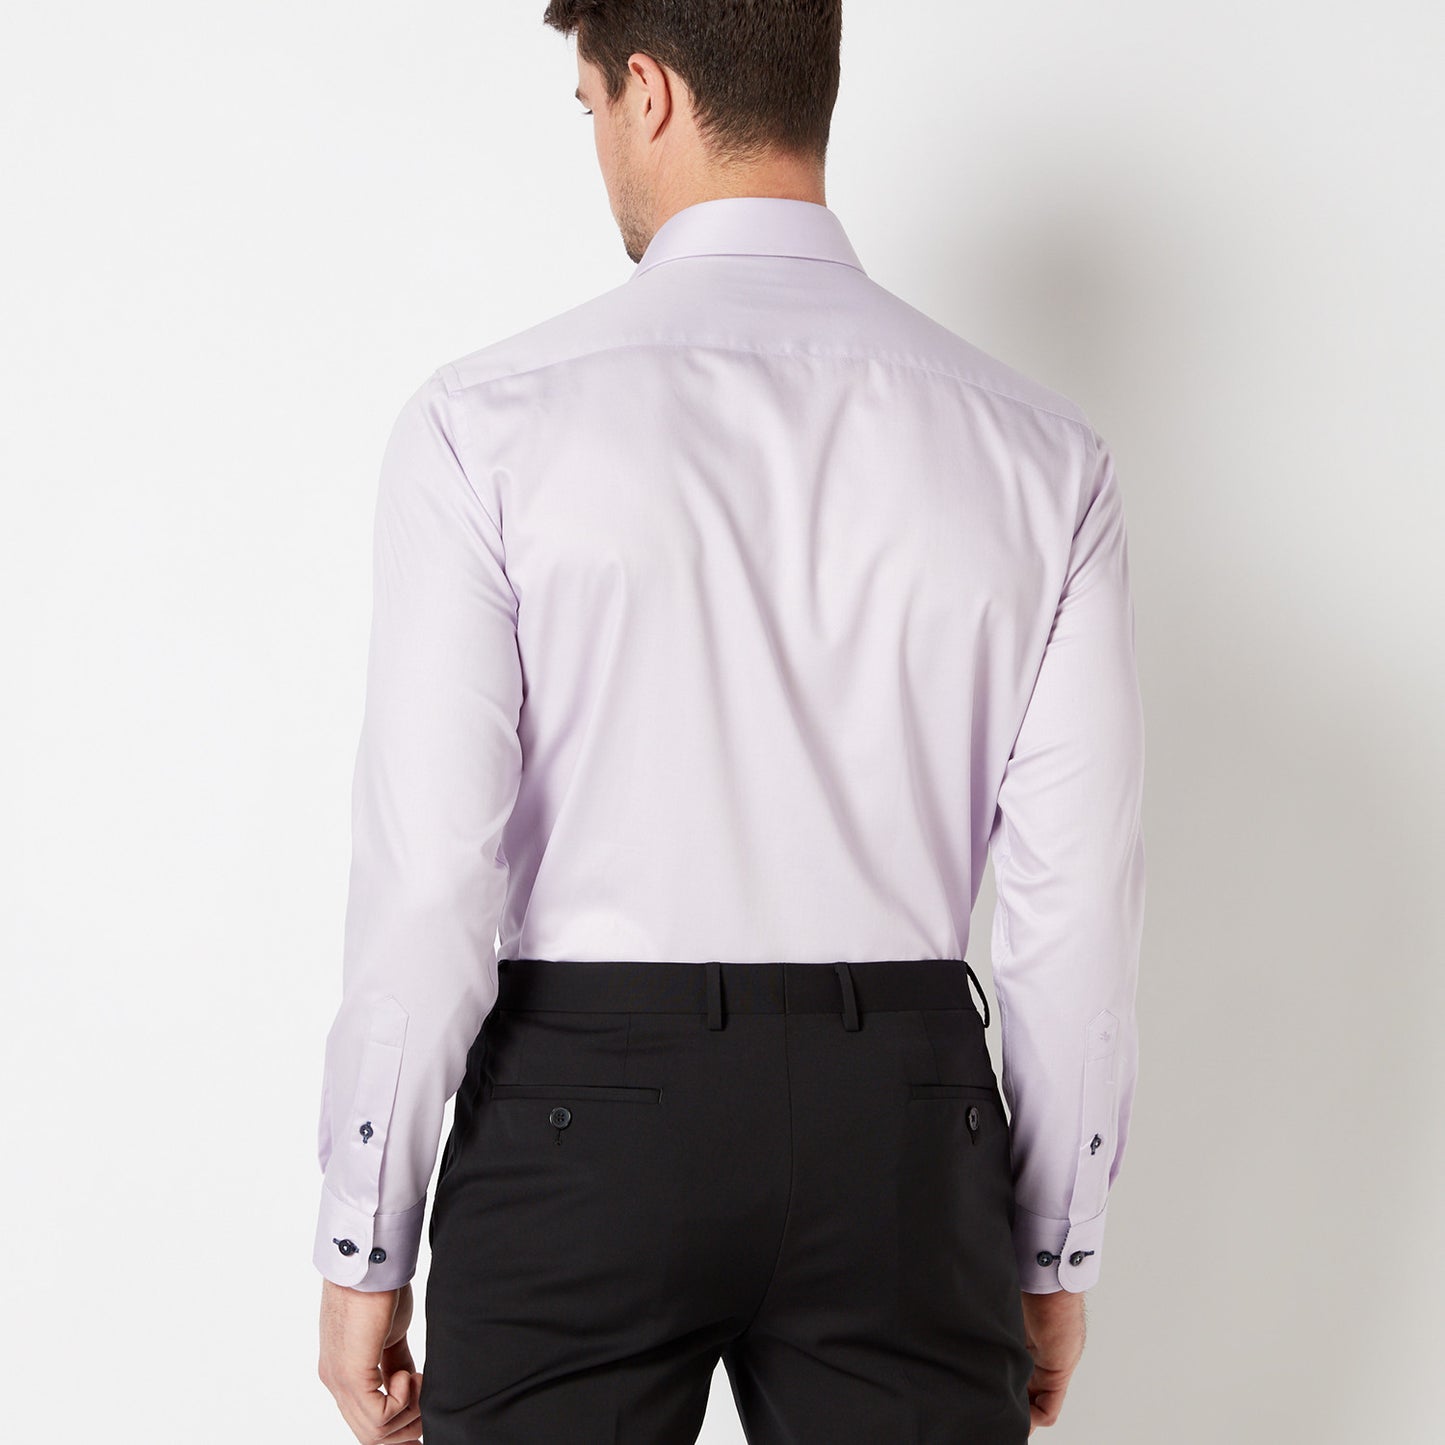 Remus Uomo 17036 Tapered Fit Lilac Long Sleeve Dress Shirt